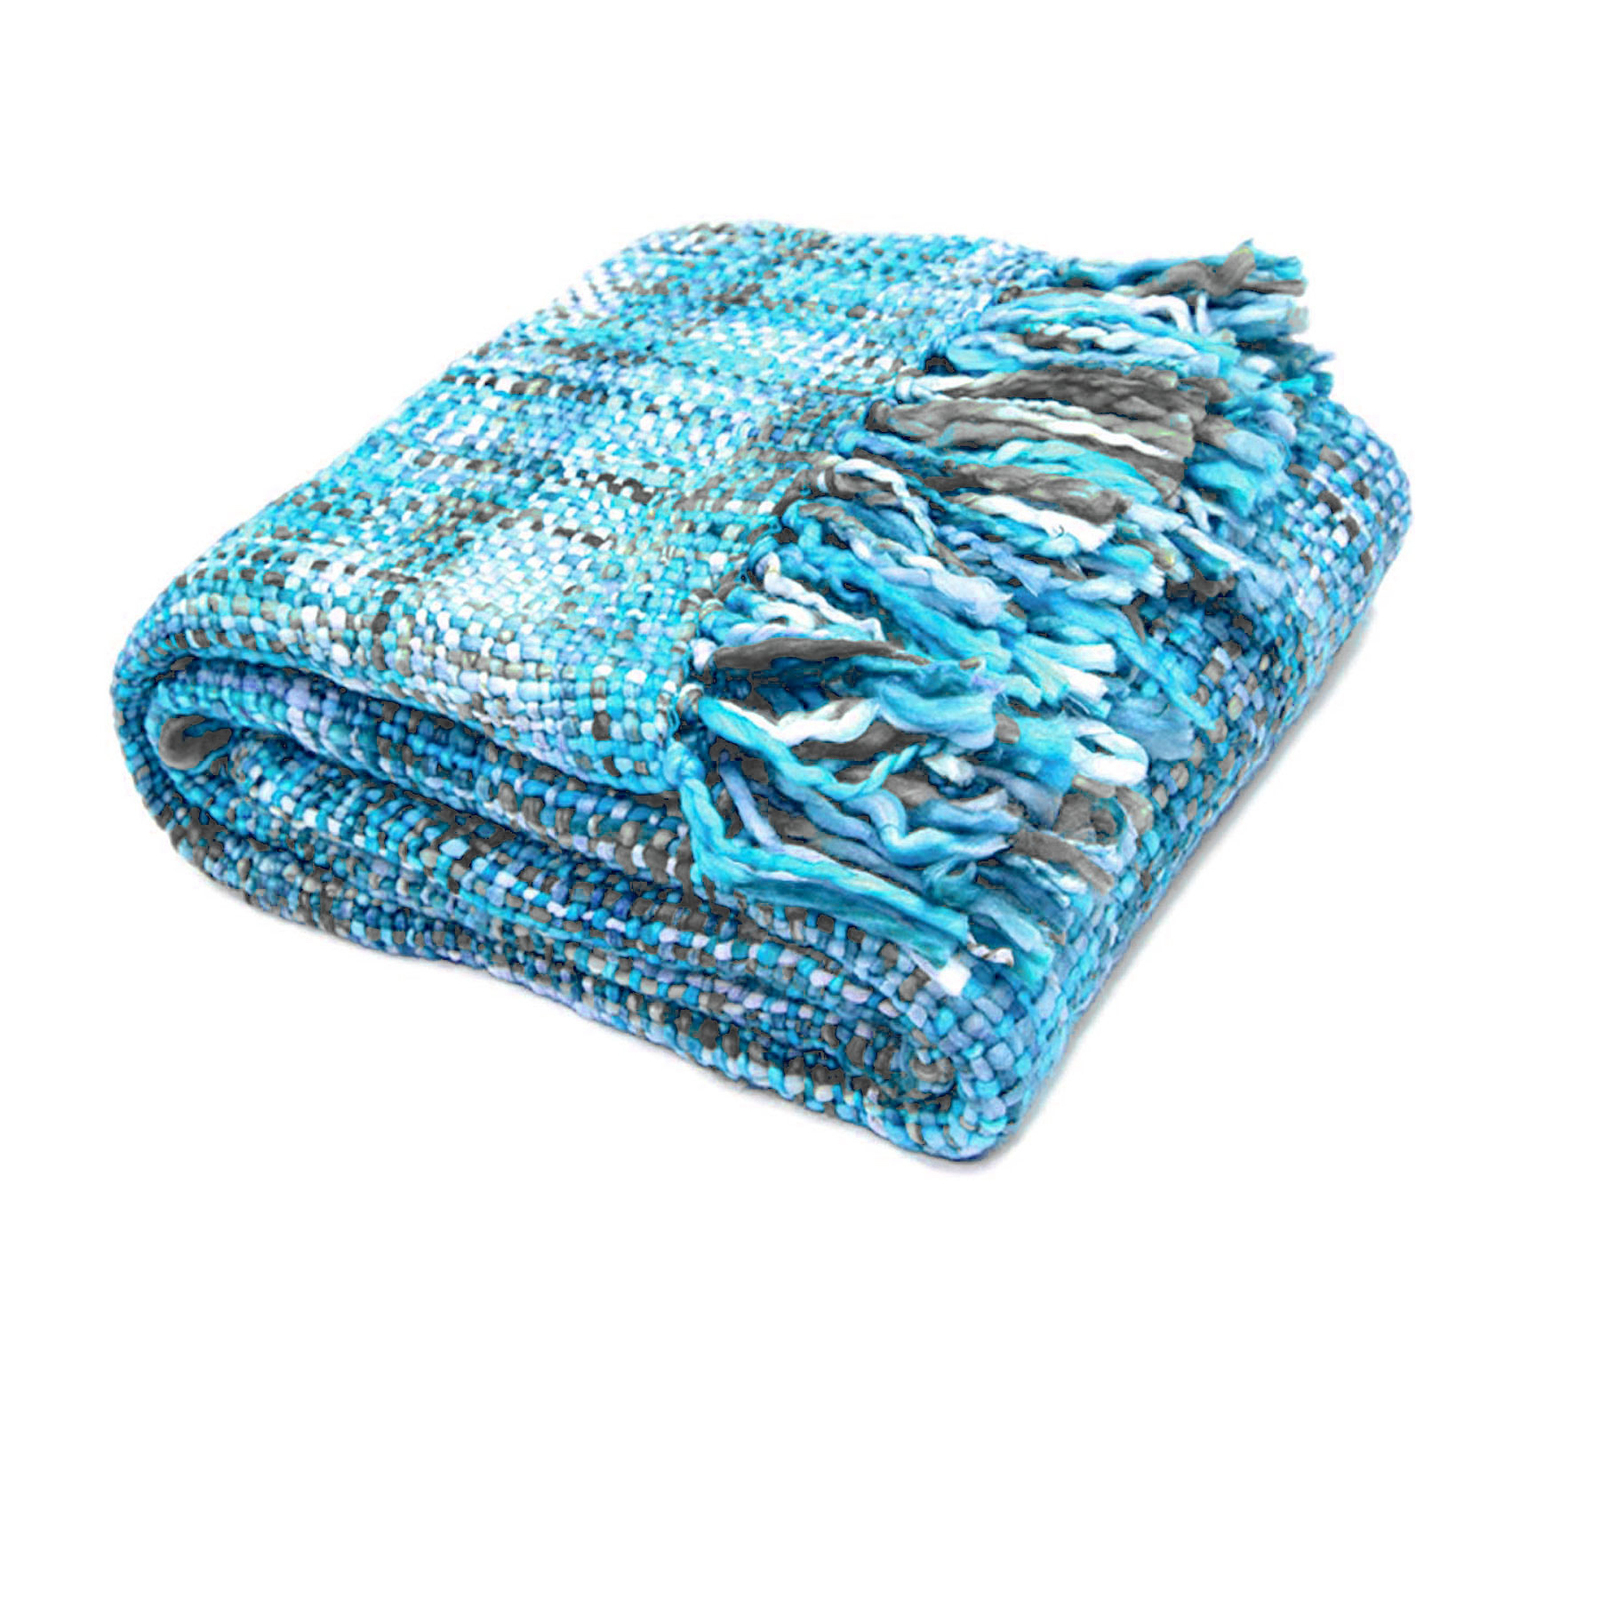 Rans Oslo Knitted Weave Throw 127x152cm